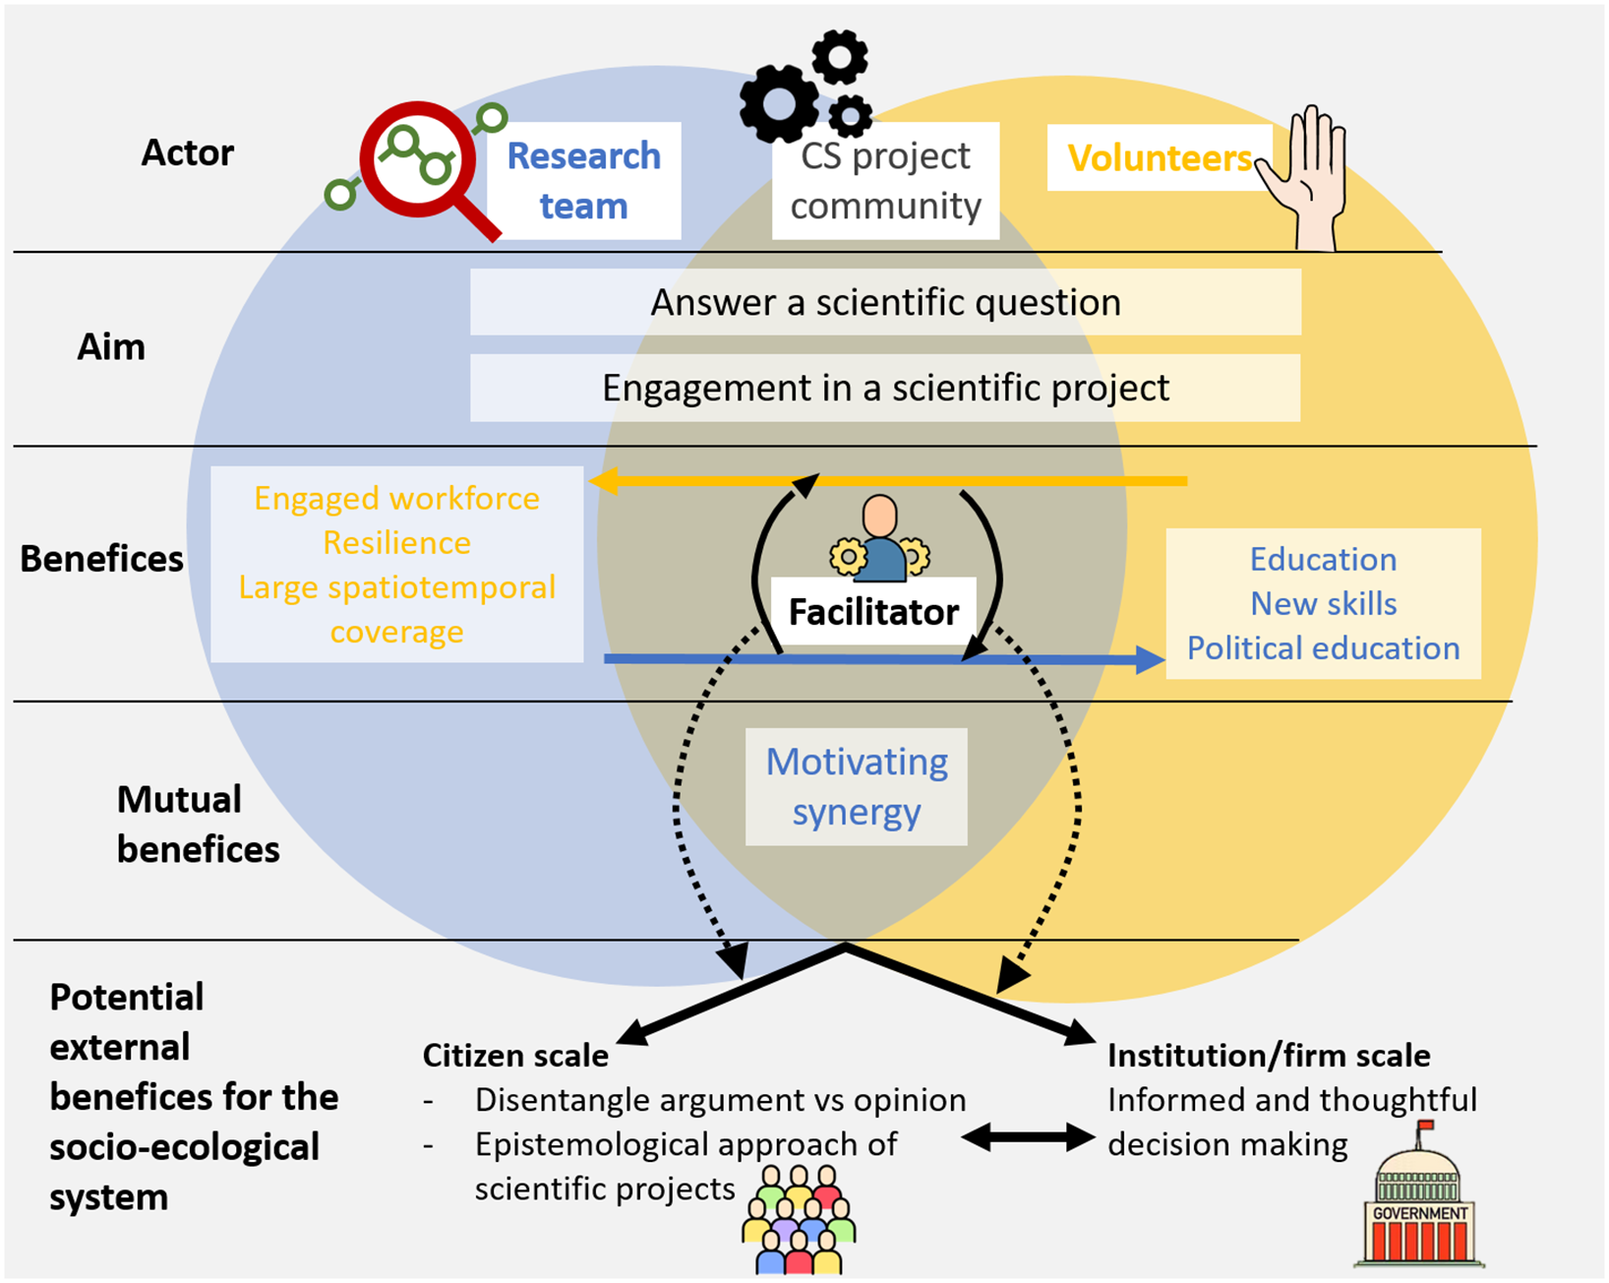 Citizen science: How to extend reciprocal benefits from the project  community to the broader socio-ecological system | Quantitative Plant  Biology | Cambridge Core